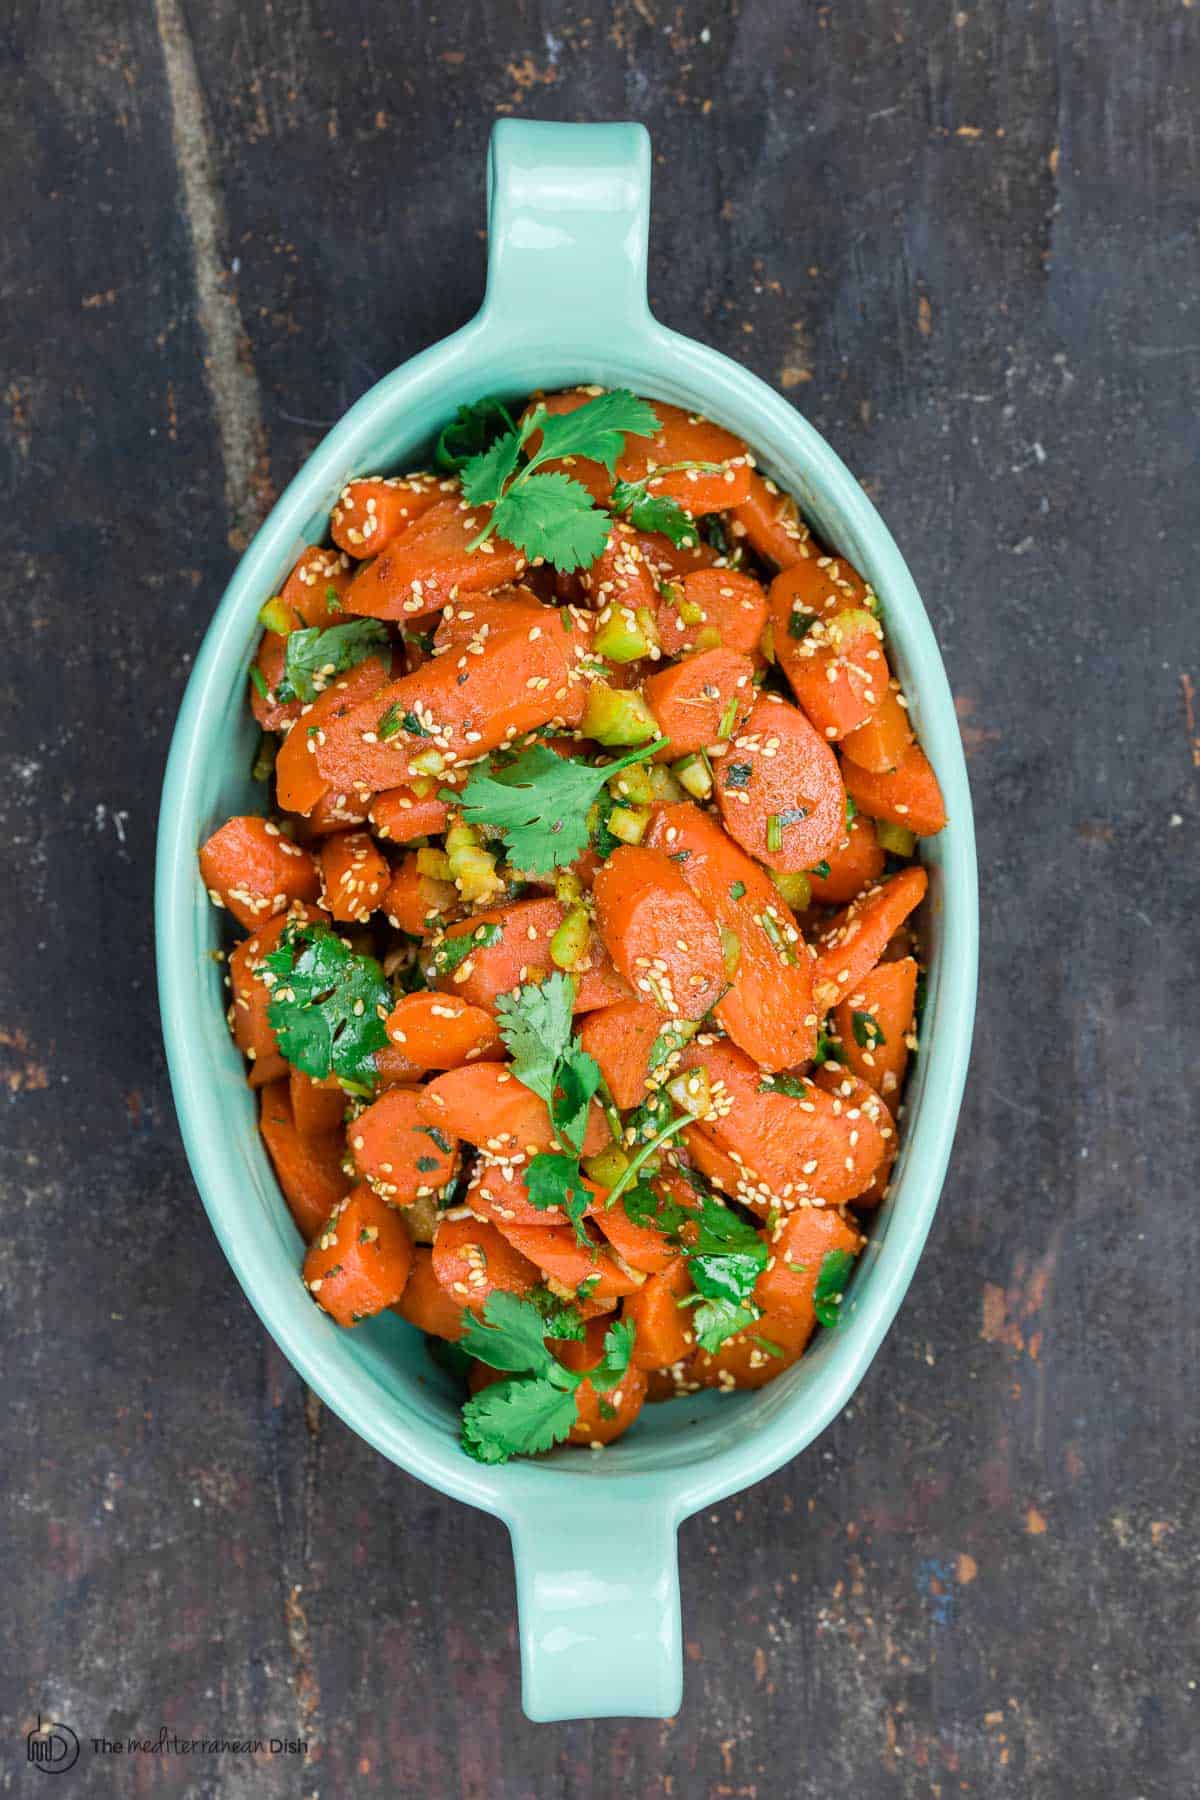 Healthy Moroccan Carrot Salad from The Mediterranean Dish